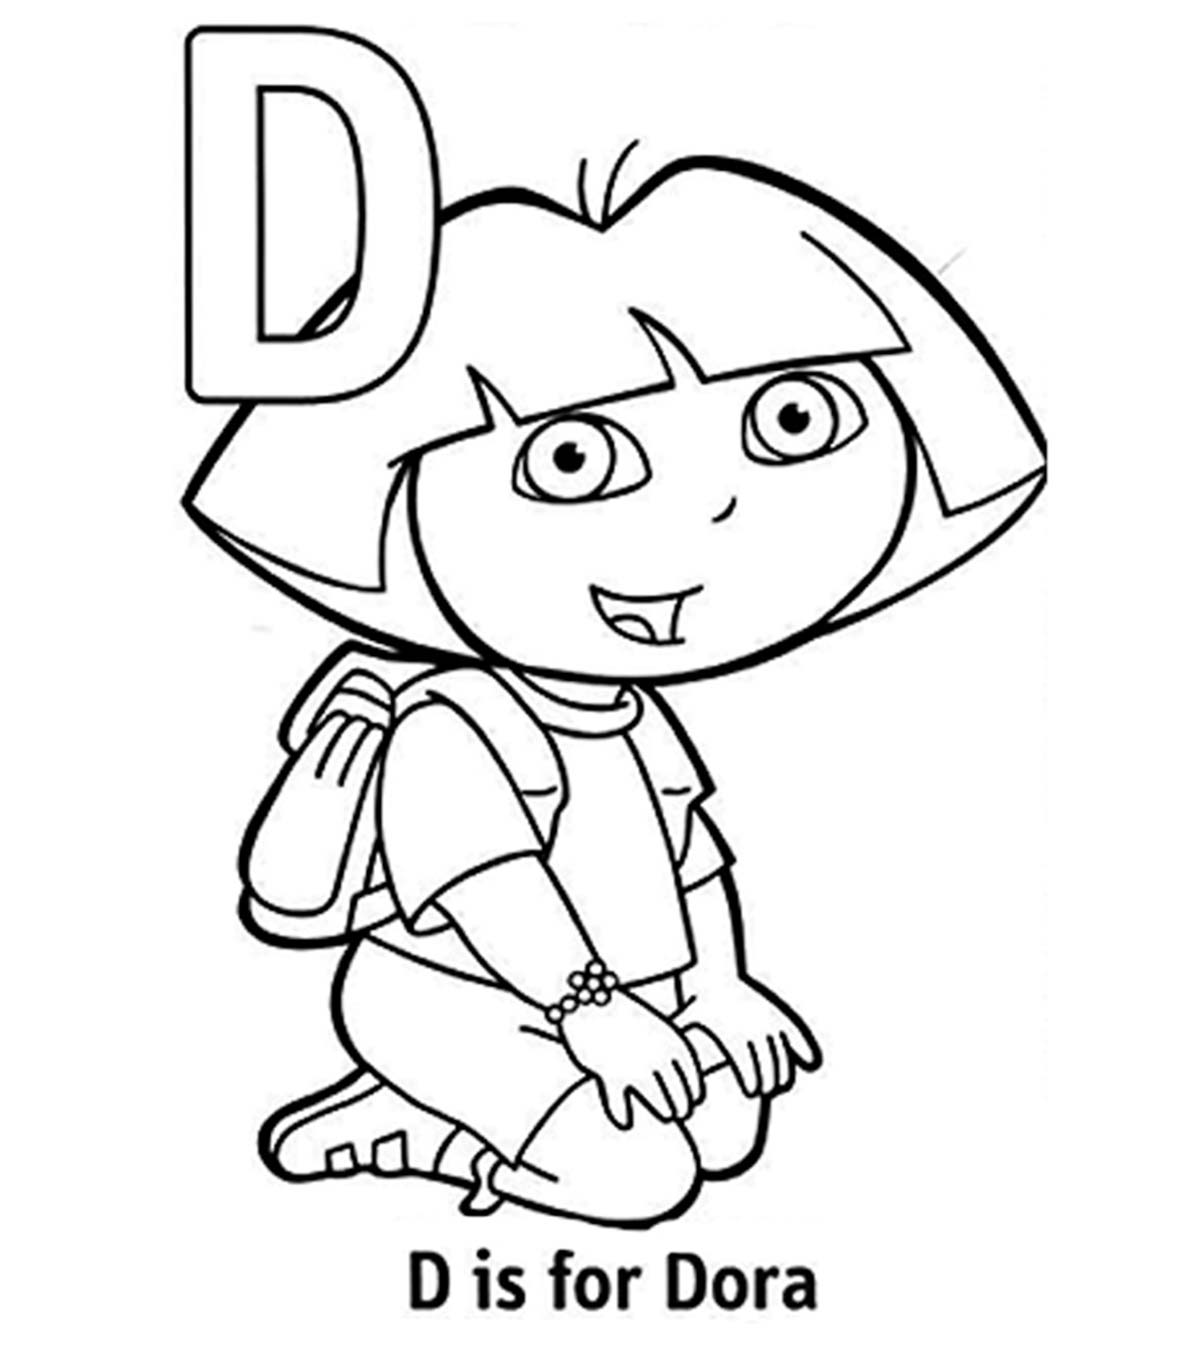 Top 10 Letter D Coloring Pages For Your Little Ones